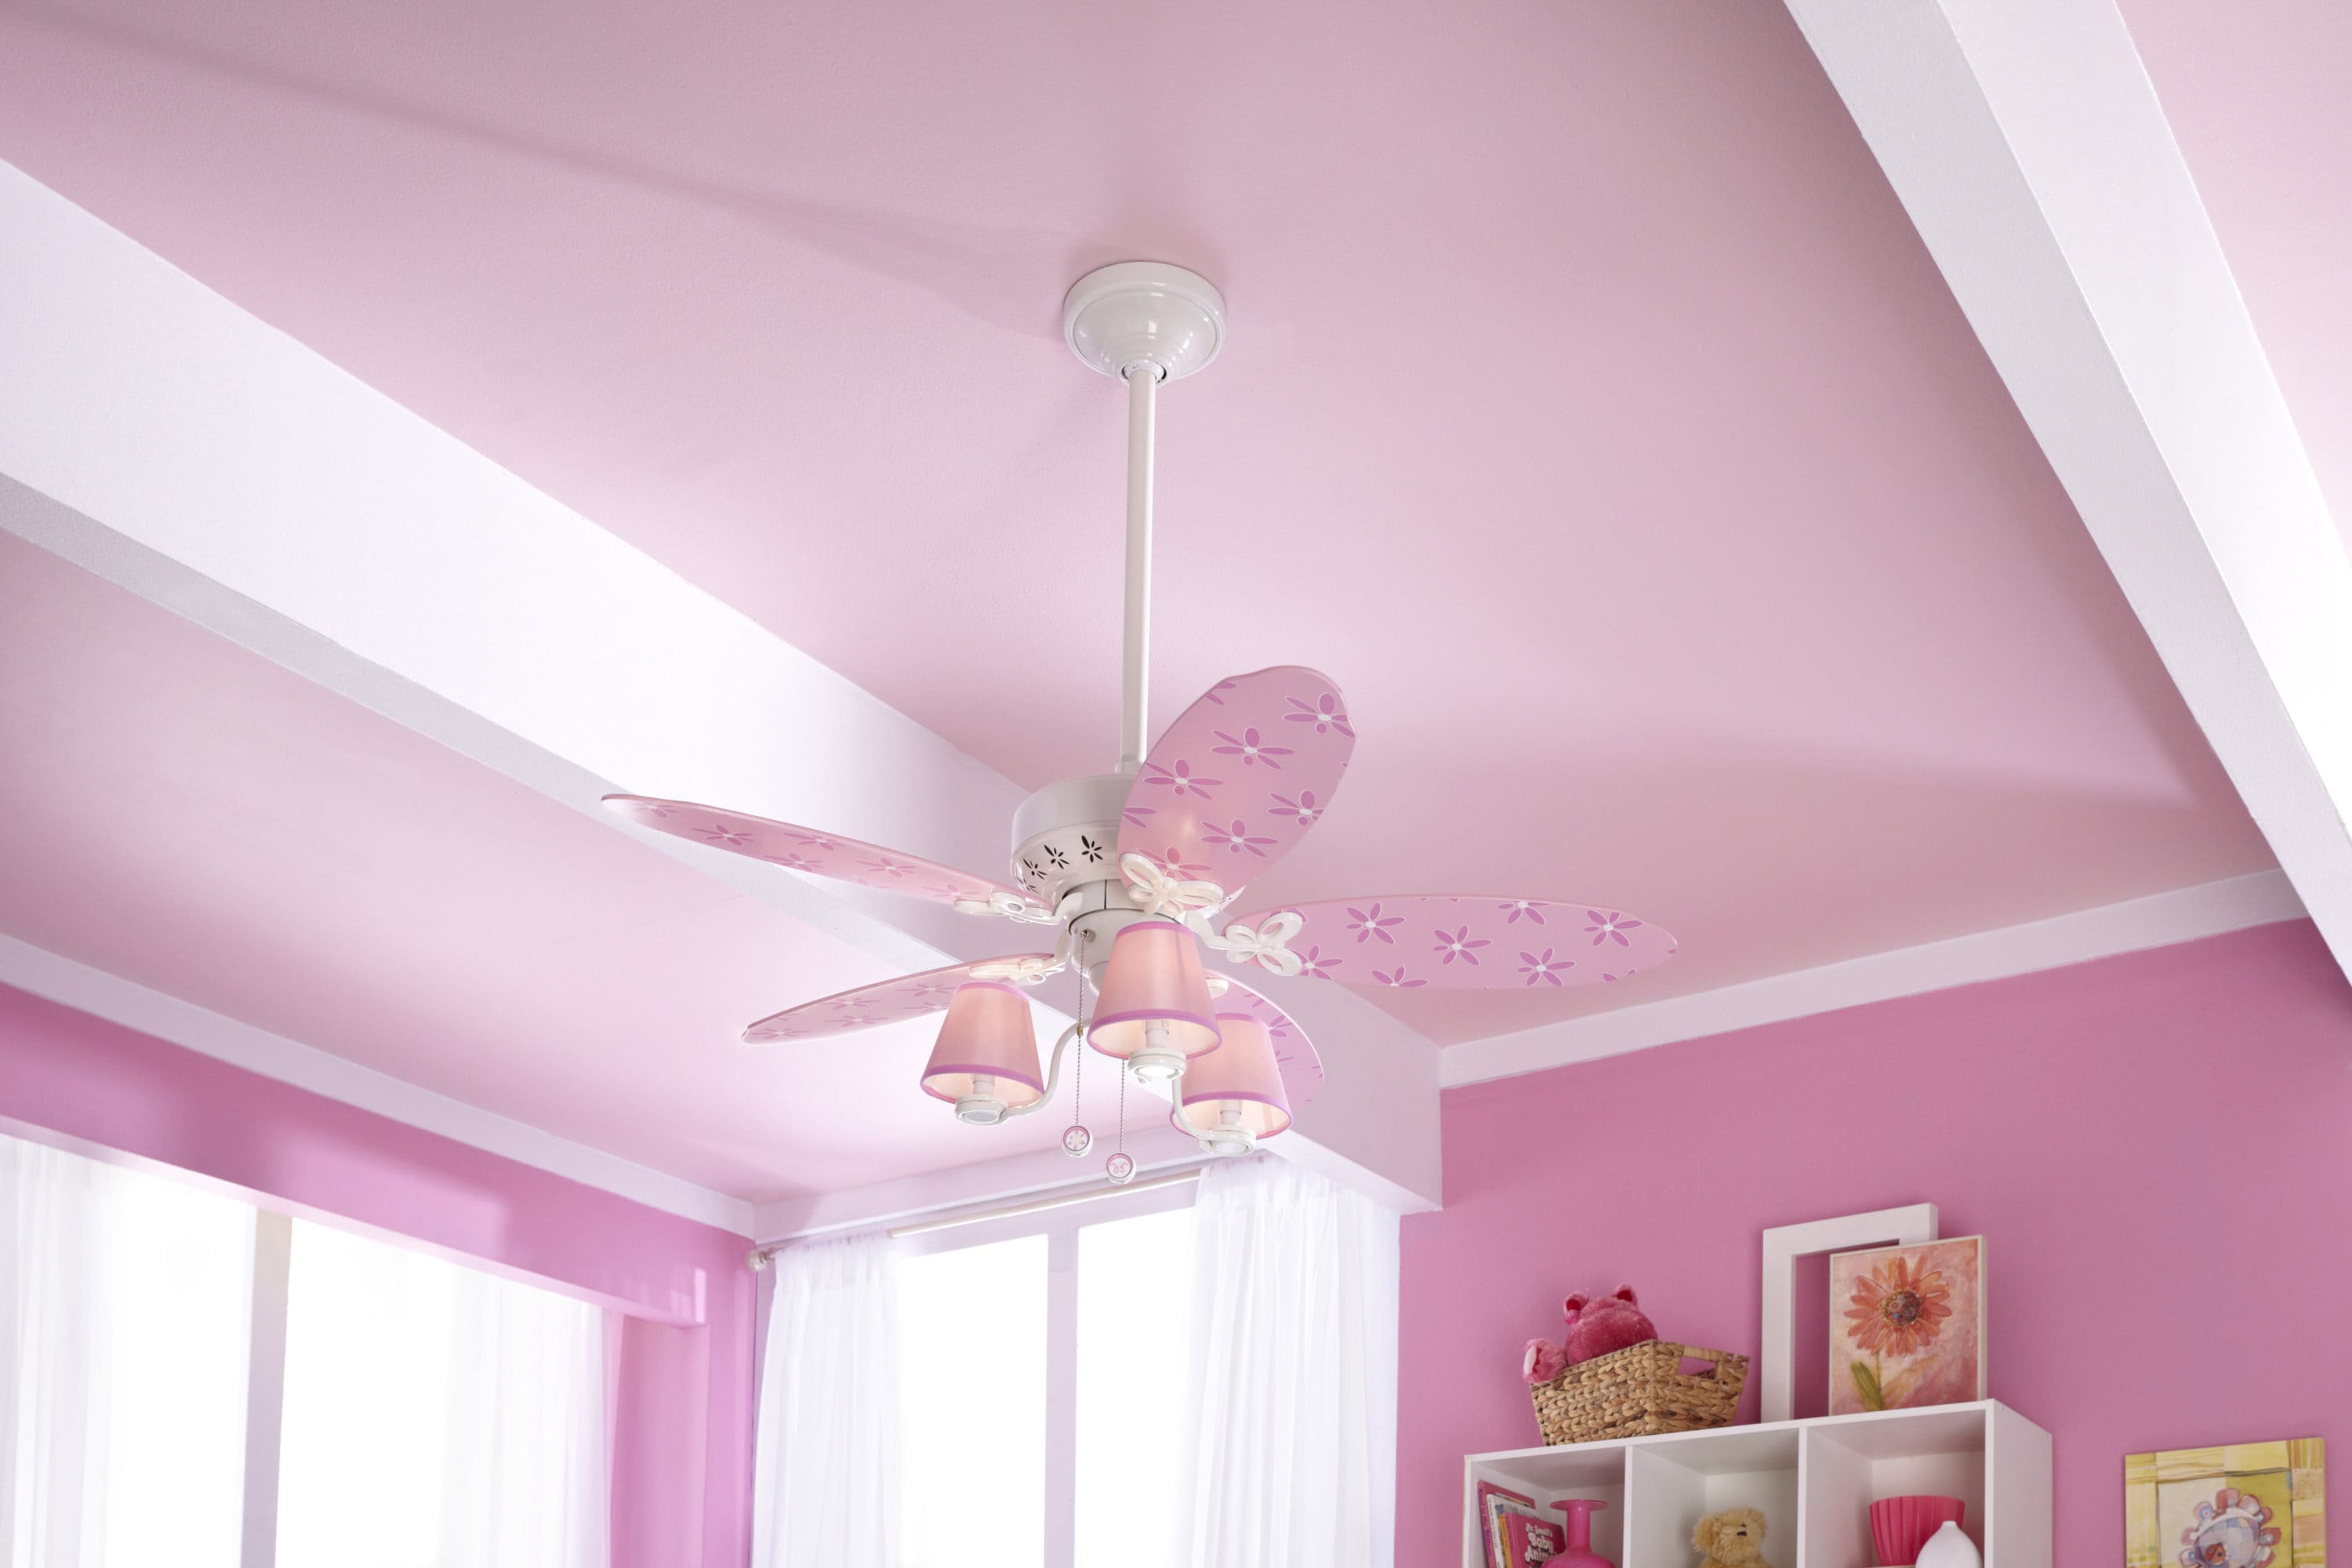 Hunter Dreamland 44 In White And Pink Indoor Downrod Or Flush Mount Ceiling Fan With Light 5 Blade The Fans Department At Lowes Com